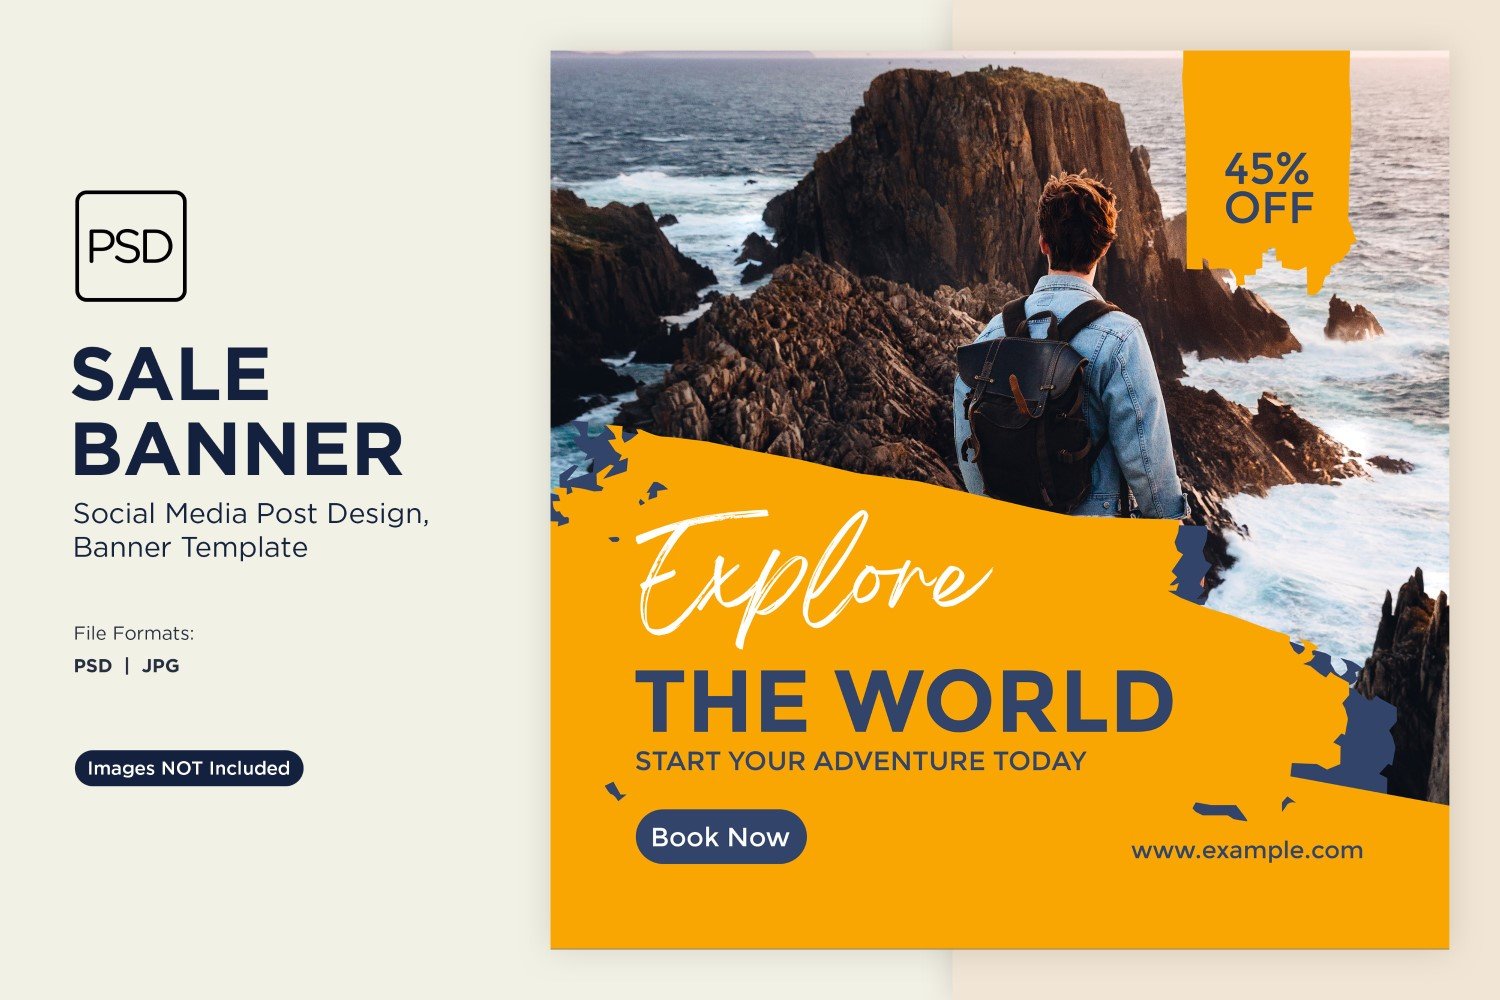 Explore the world travel and adventure sale banner design Template 1